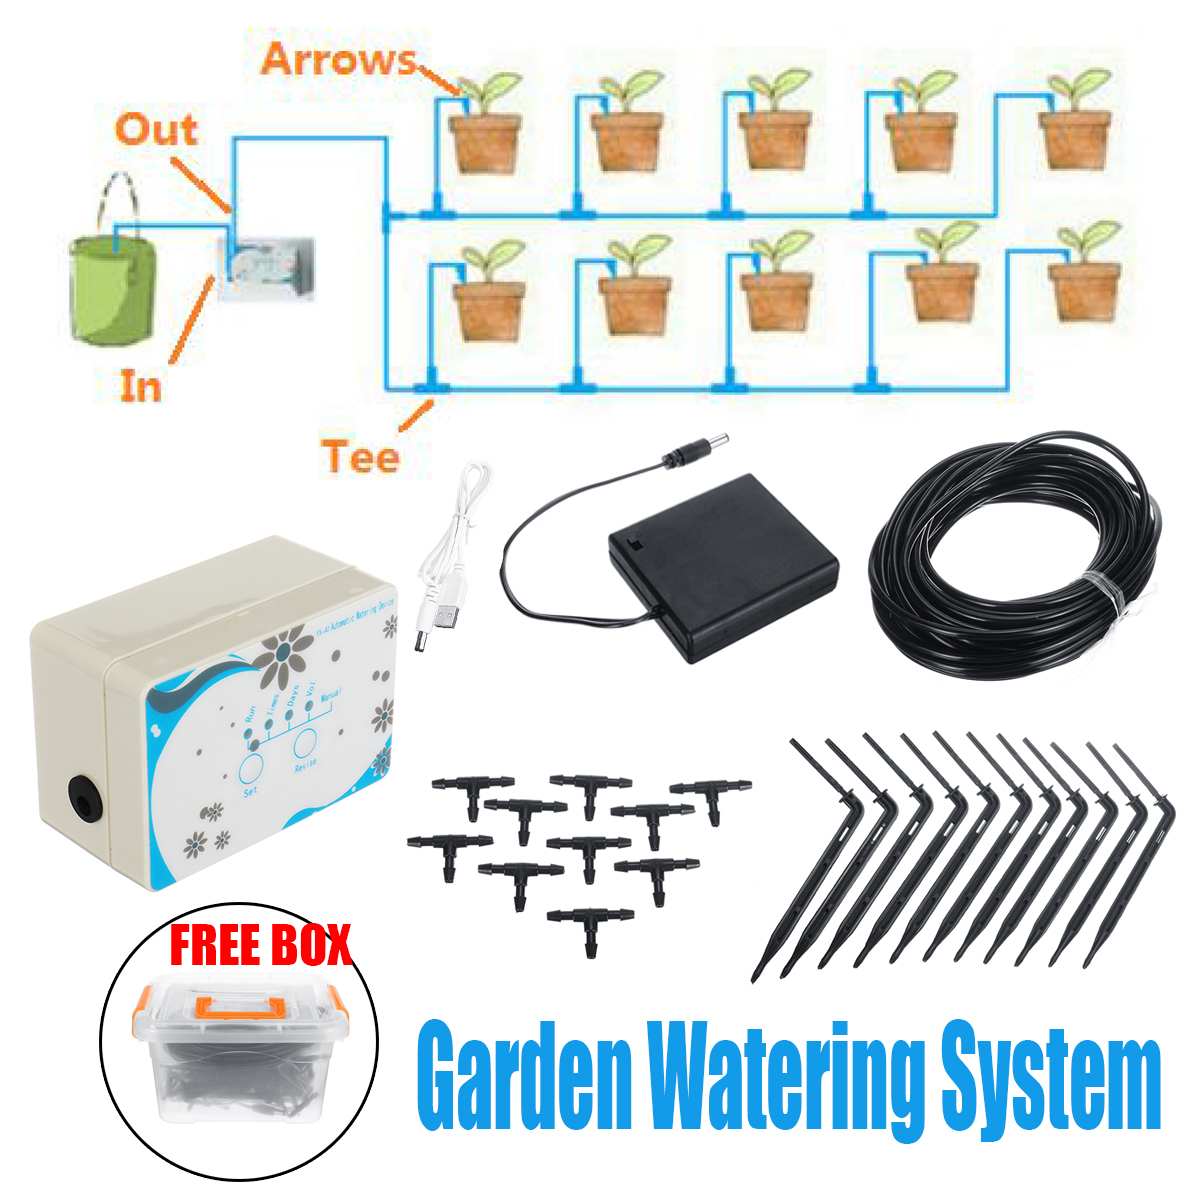 Automatic-Intelligent-Electronic-Digital-Watering-Timer-Home-Ball-Valve-Garden-Water-Timer-Irrigatio-1550606